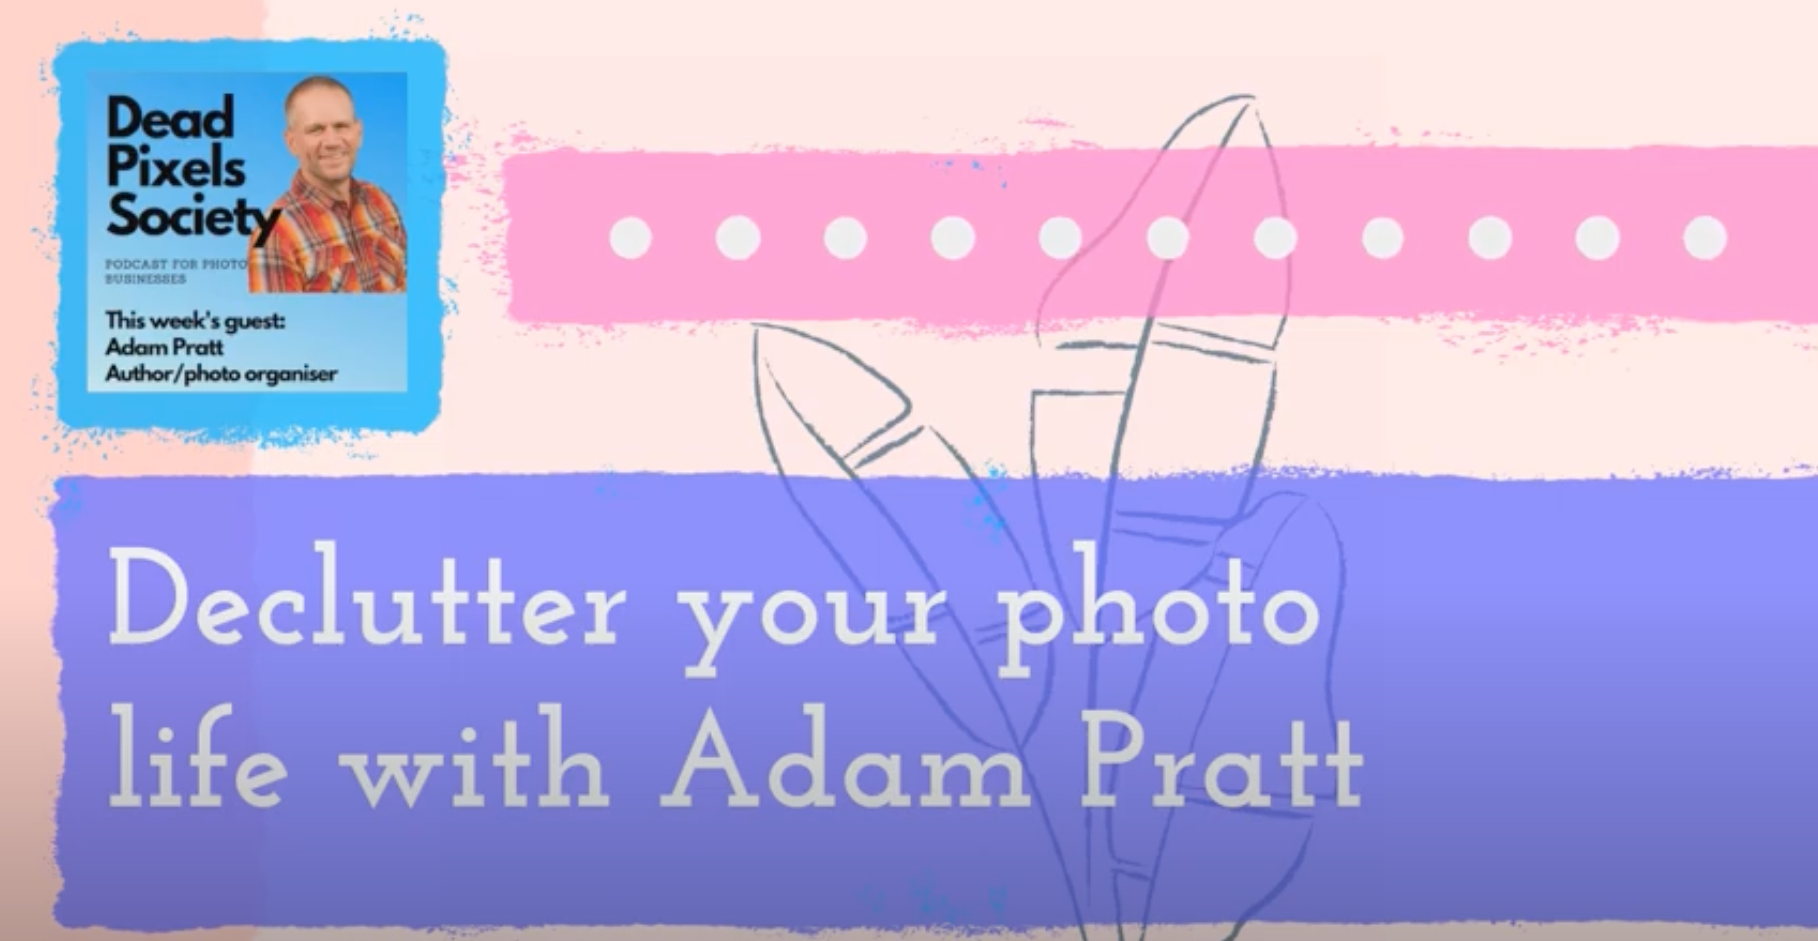 dead pixels society podcast Declutter Your Photo Life by Adam Pratt